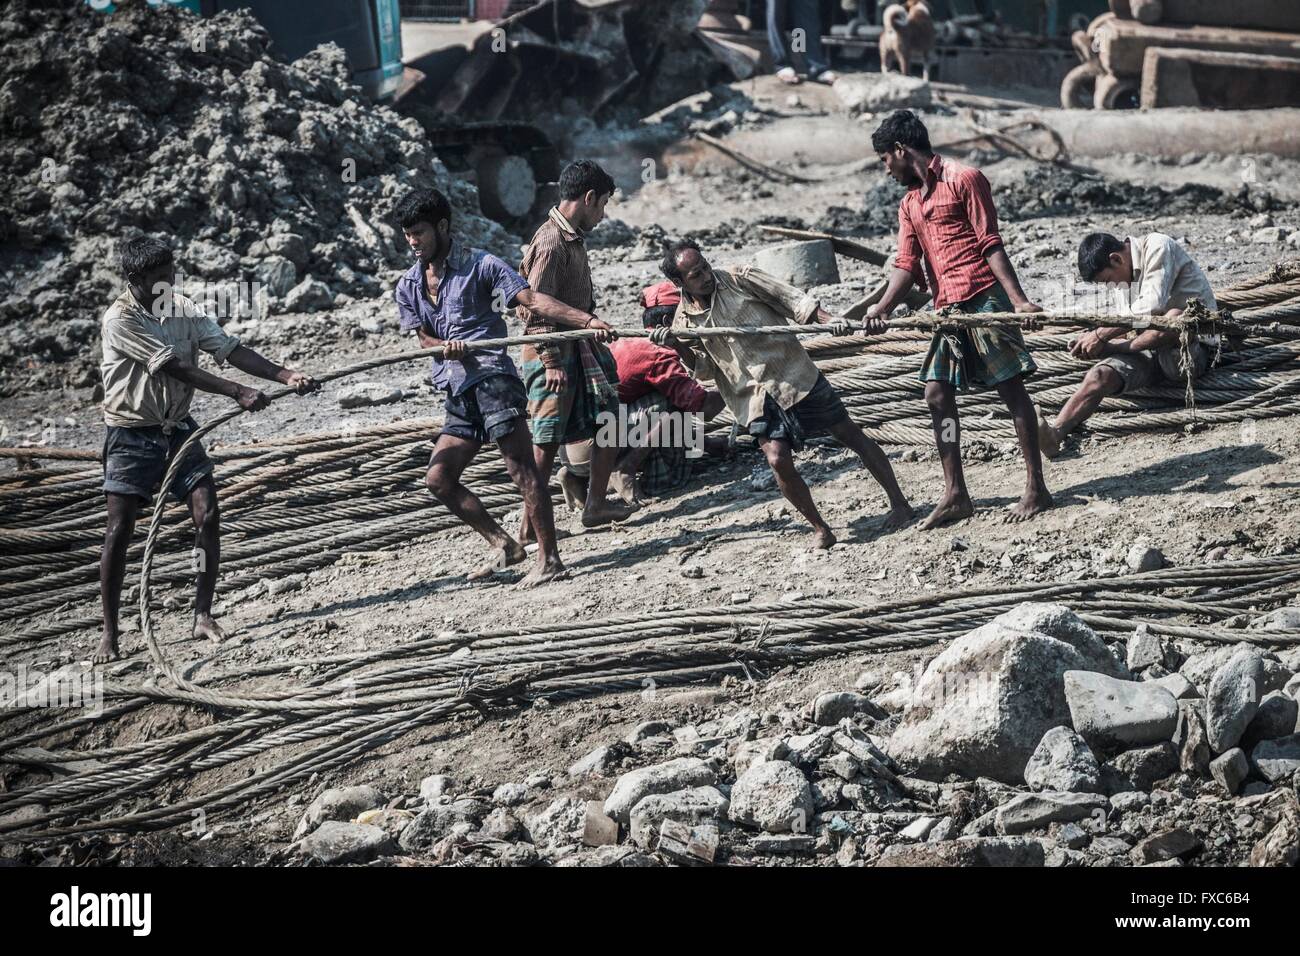 Workers are dragging a heavy pull rope in a shipbreaking yard in Chittagong. Once the beach at the shipwrecking places in Chittagong, Bangladesh were white and clean. Today Chittagong is partially soaked with oil and toxic mud. Stock Photo